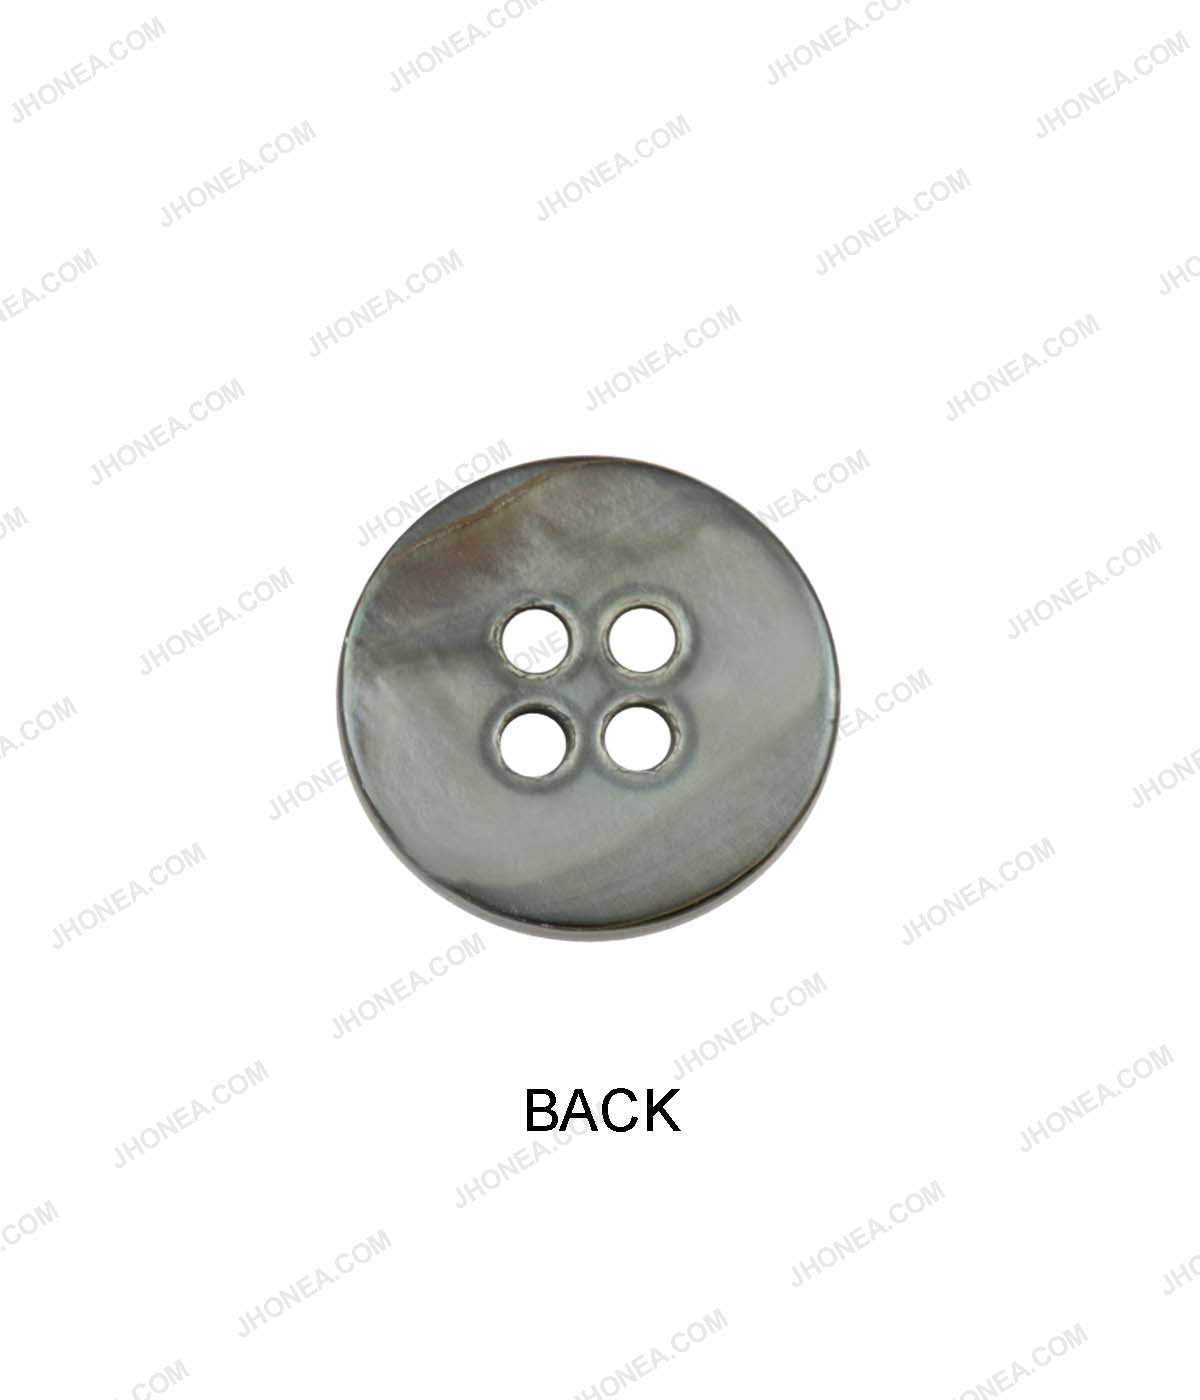 Glossy & Shiny Pearlescent Grey Rounded Rim Shirt Buttons